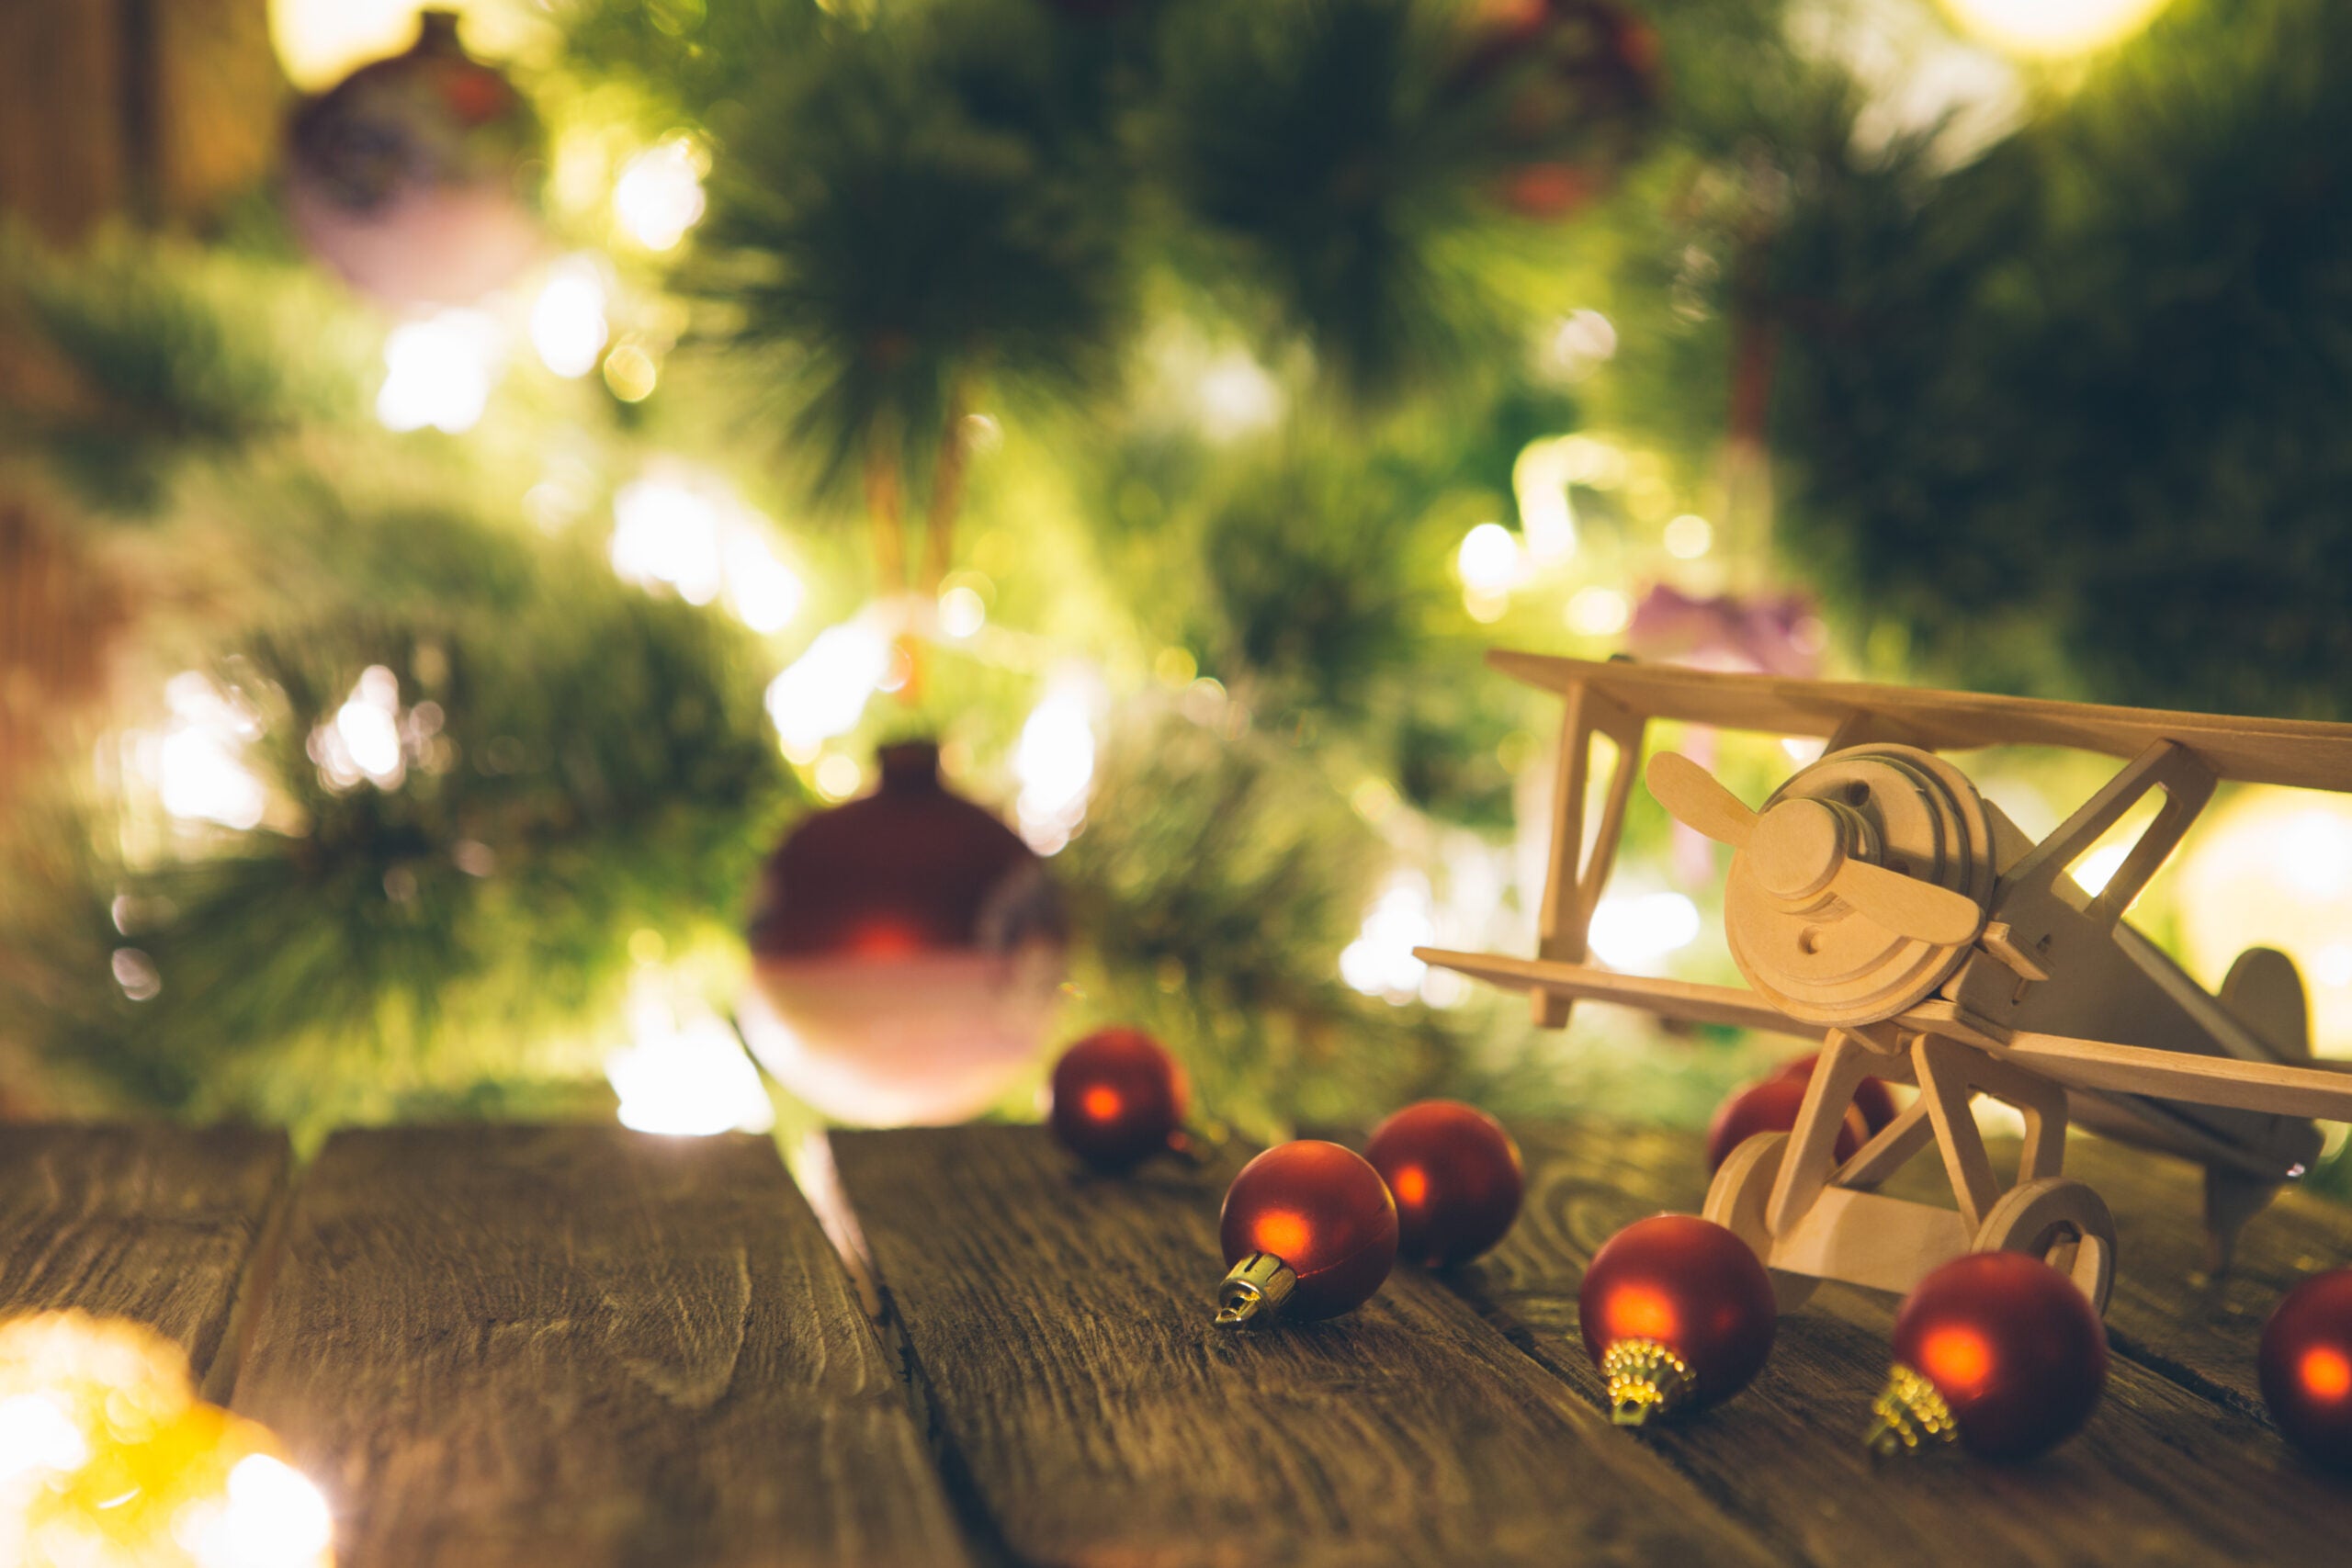 You Can Wing It with Aviation-Themed Ornaments